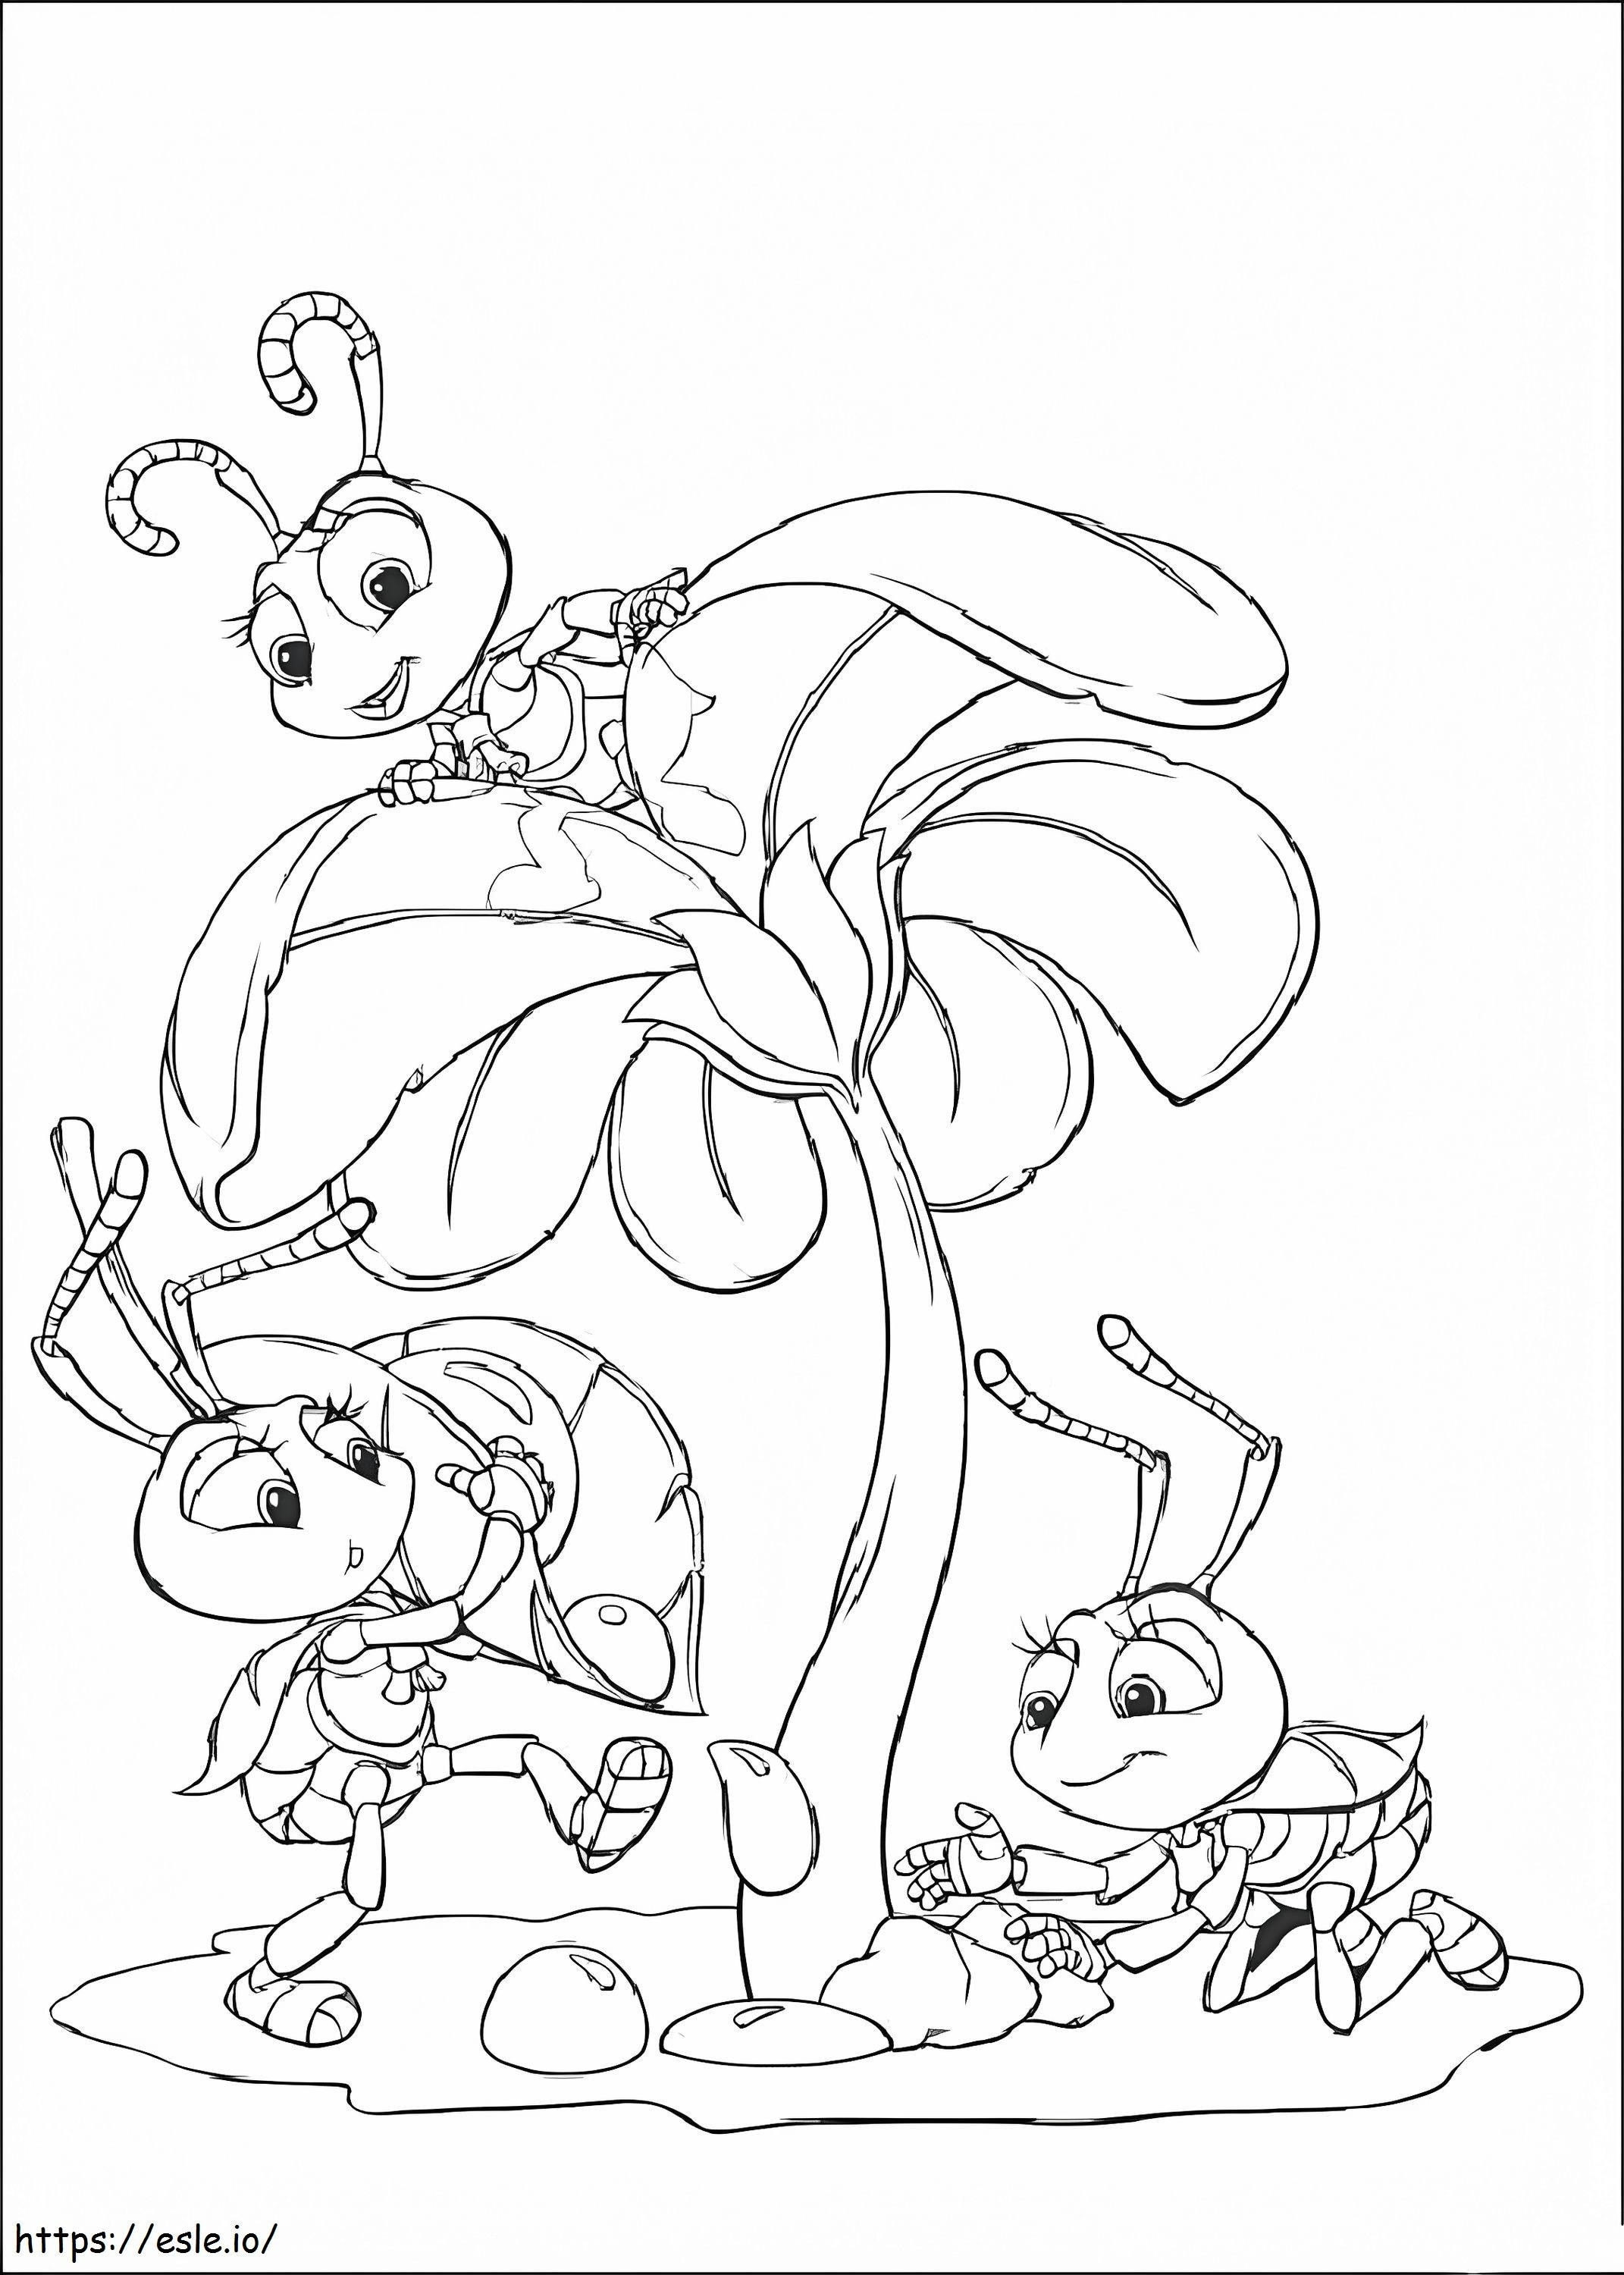 1599611351 Bugs Life coloring page